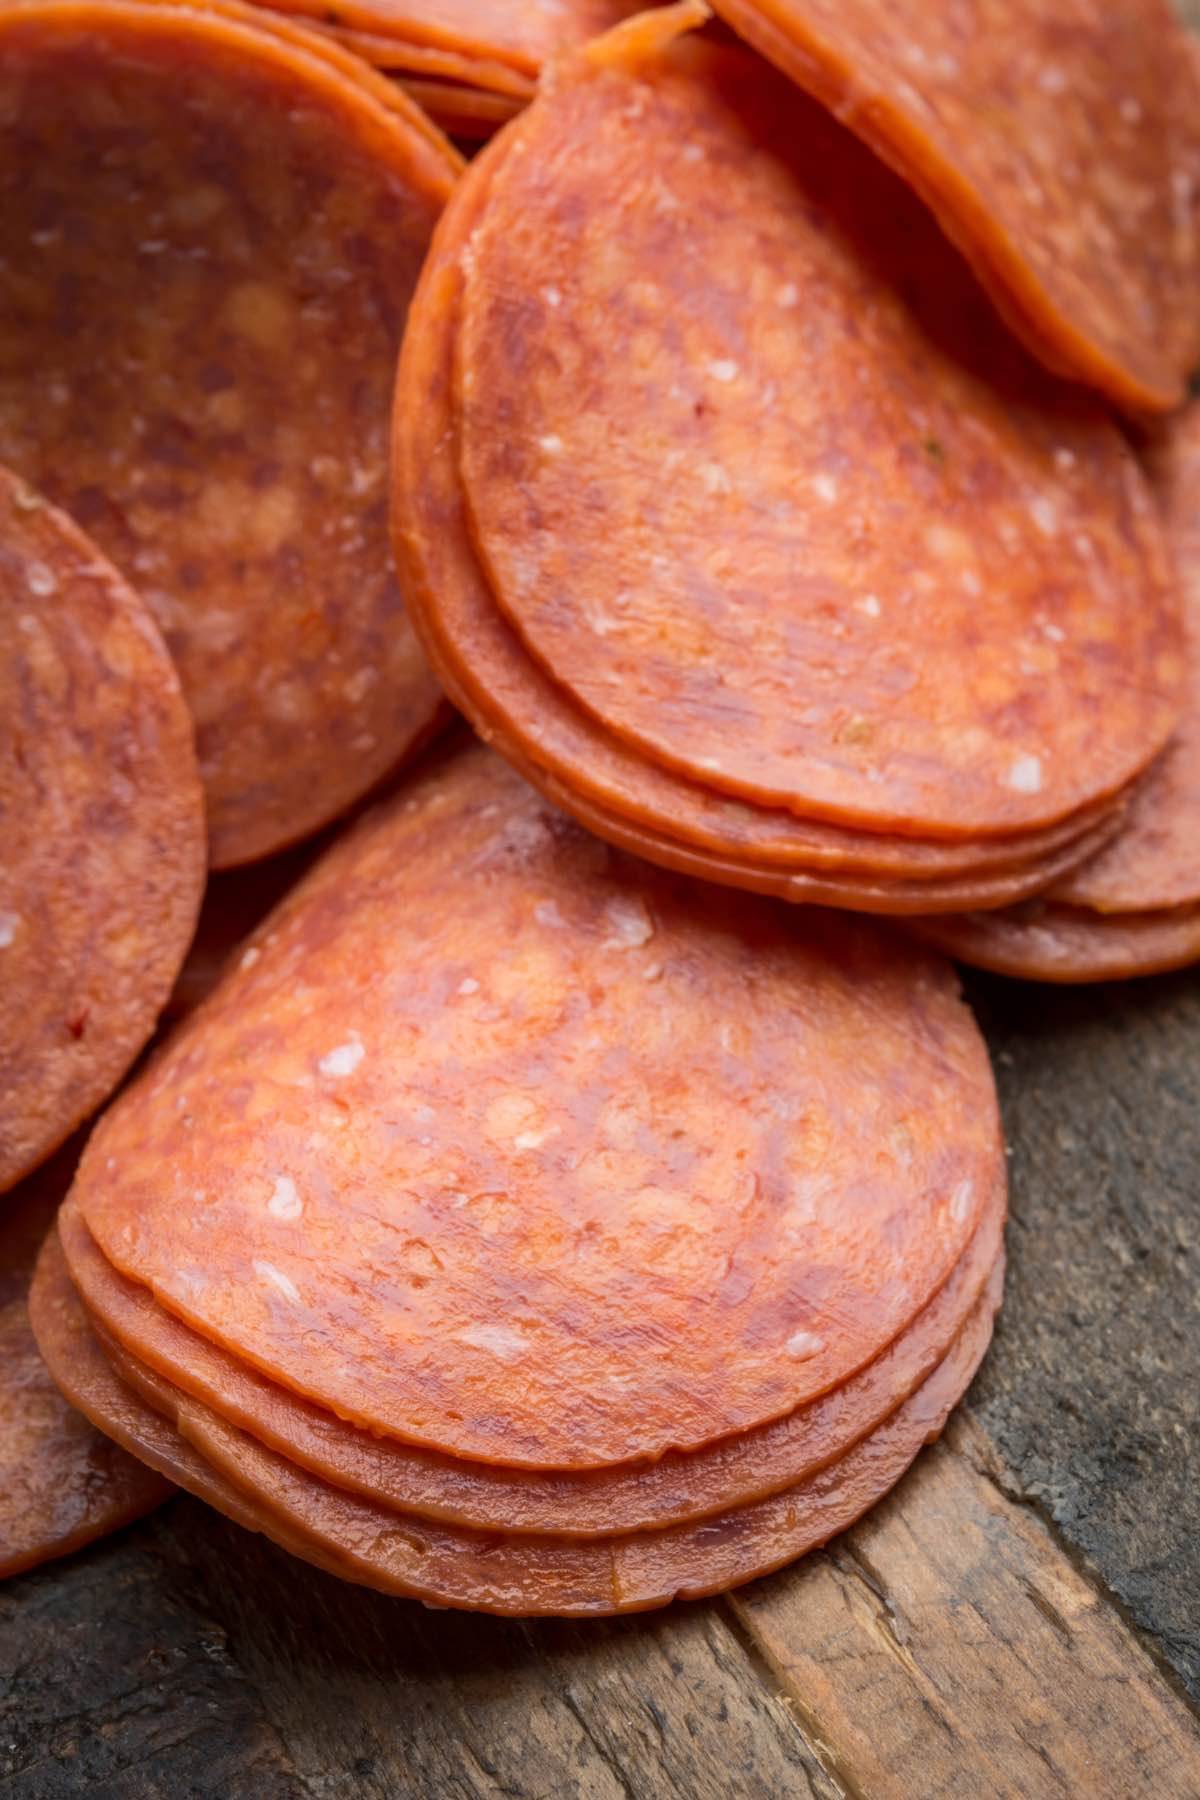 Pepperoni could in fact be made of pork, beef, or both. There are also other varieties like those that are strictly beef or strictly turkey. 